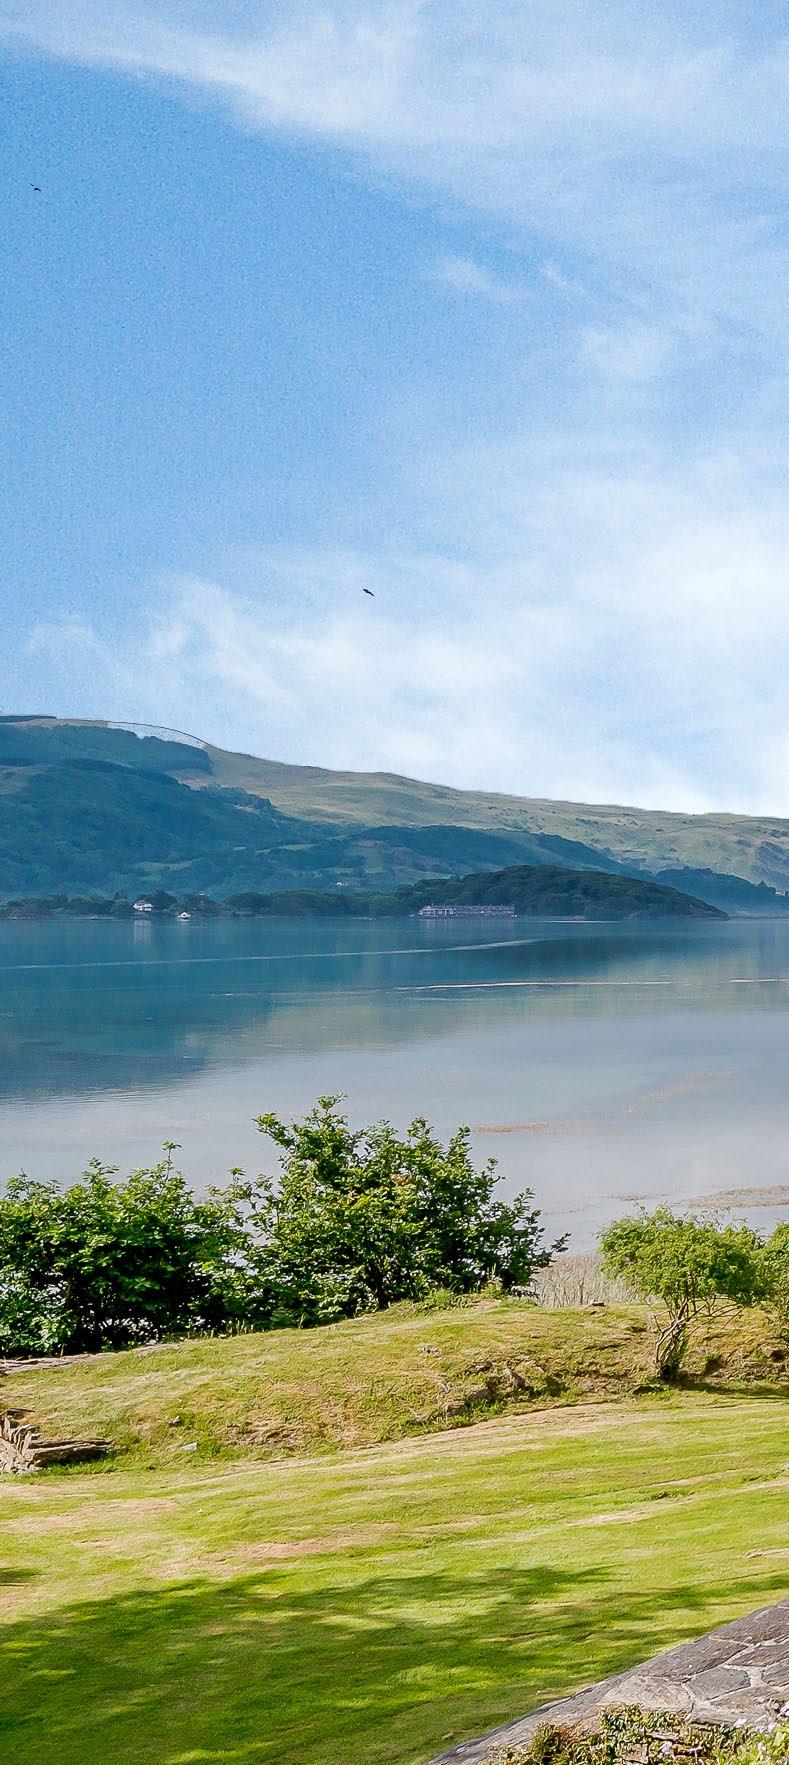 A beautiful country house standing in idyllic grounds with a swimming pool, tennis court, quay and spectacular views over the Mawddach Estuary.